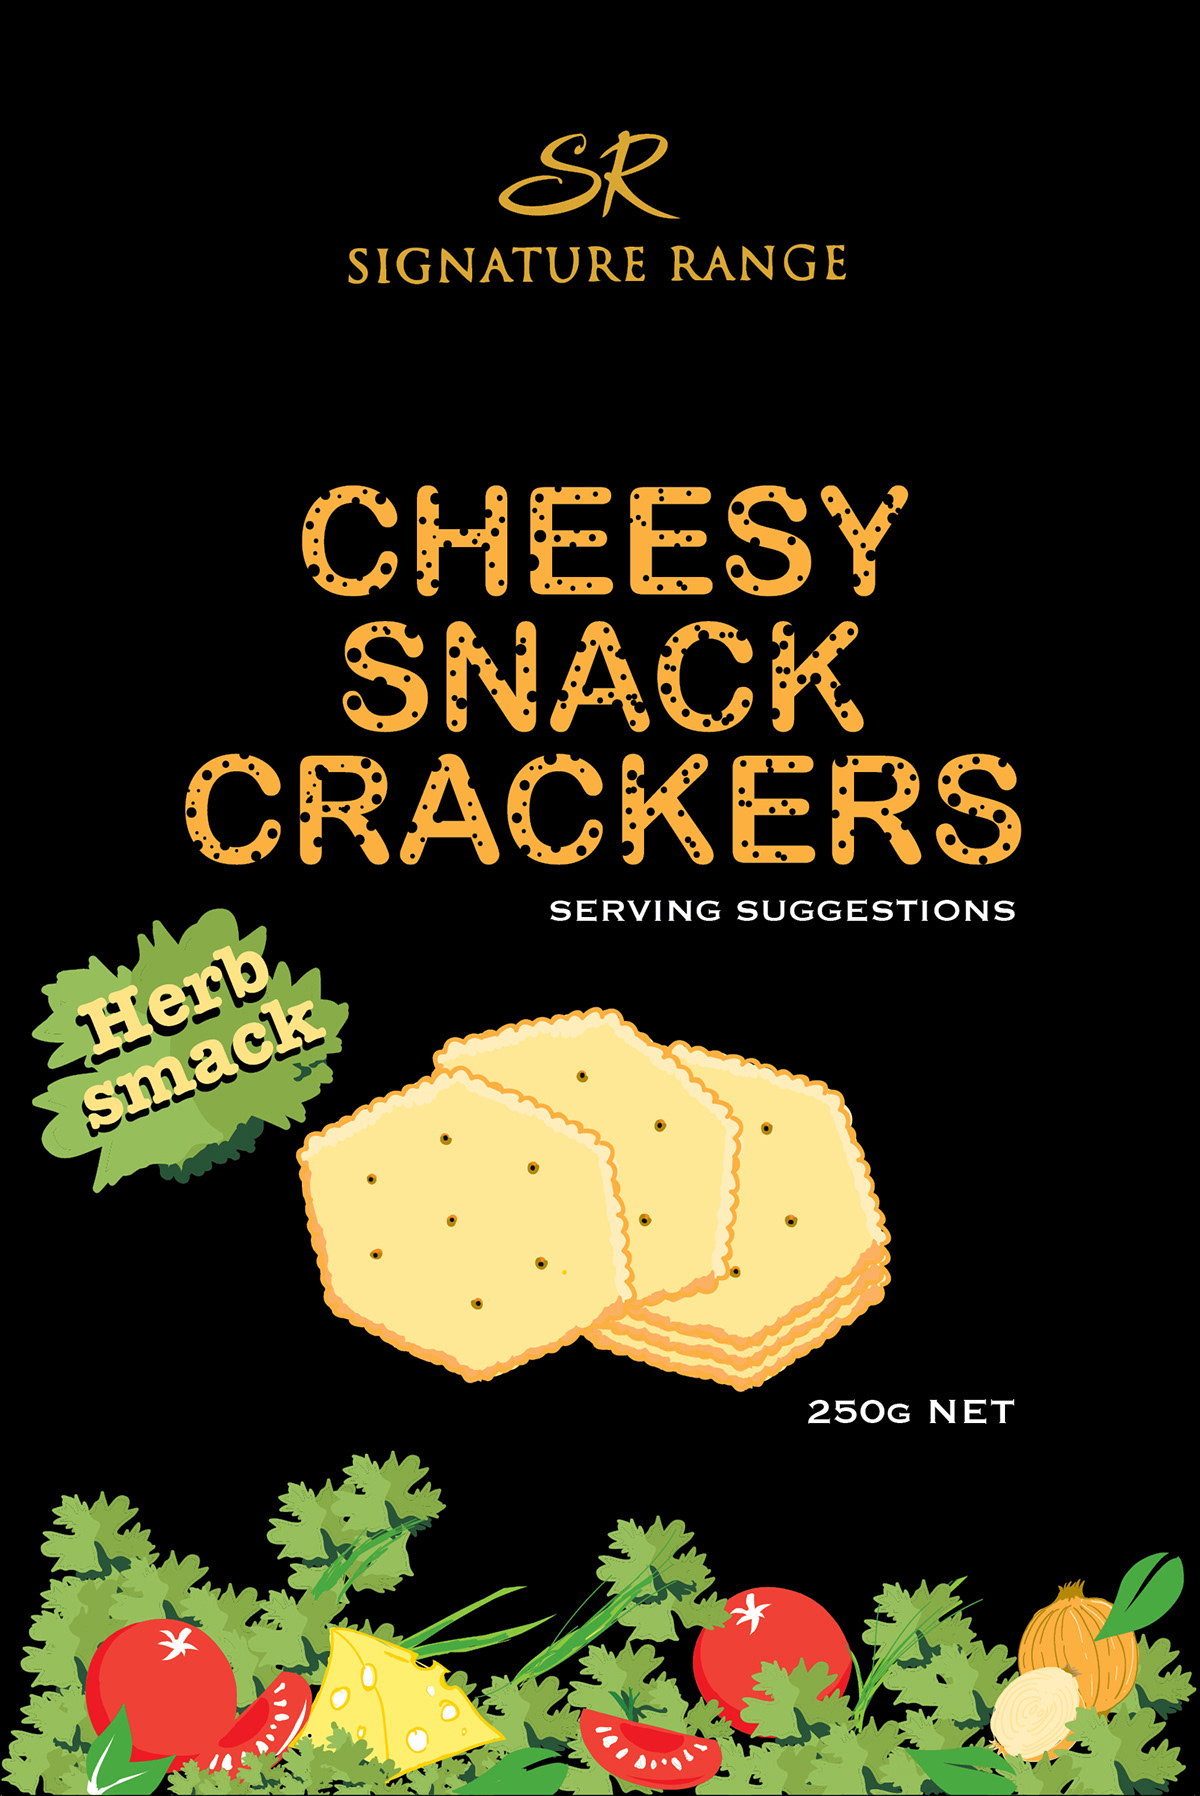 cheesy crackers product package design redesign Package Redesign Signature Range FMCG Fast moving consumer goods Consumer print illustration